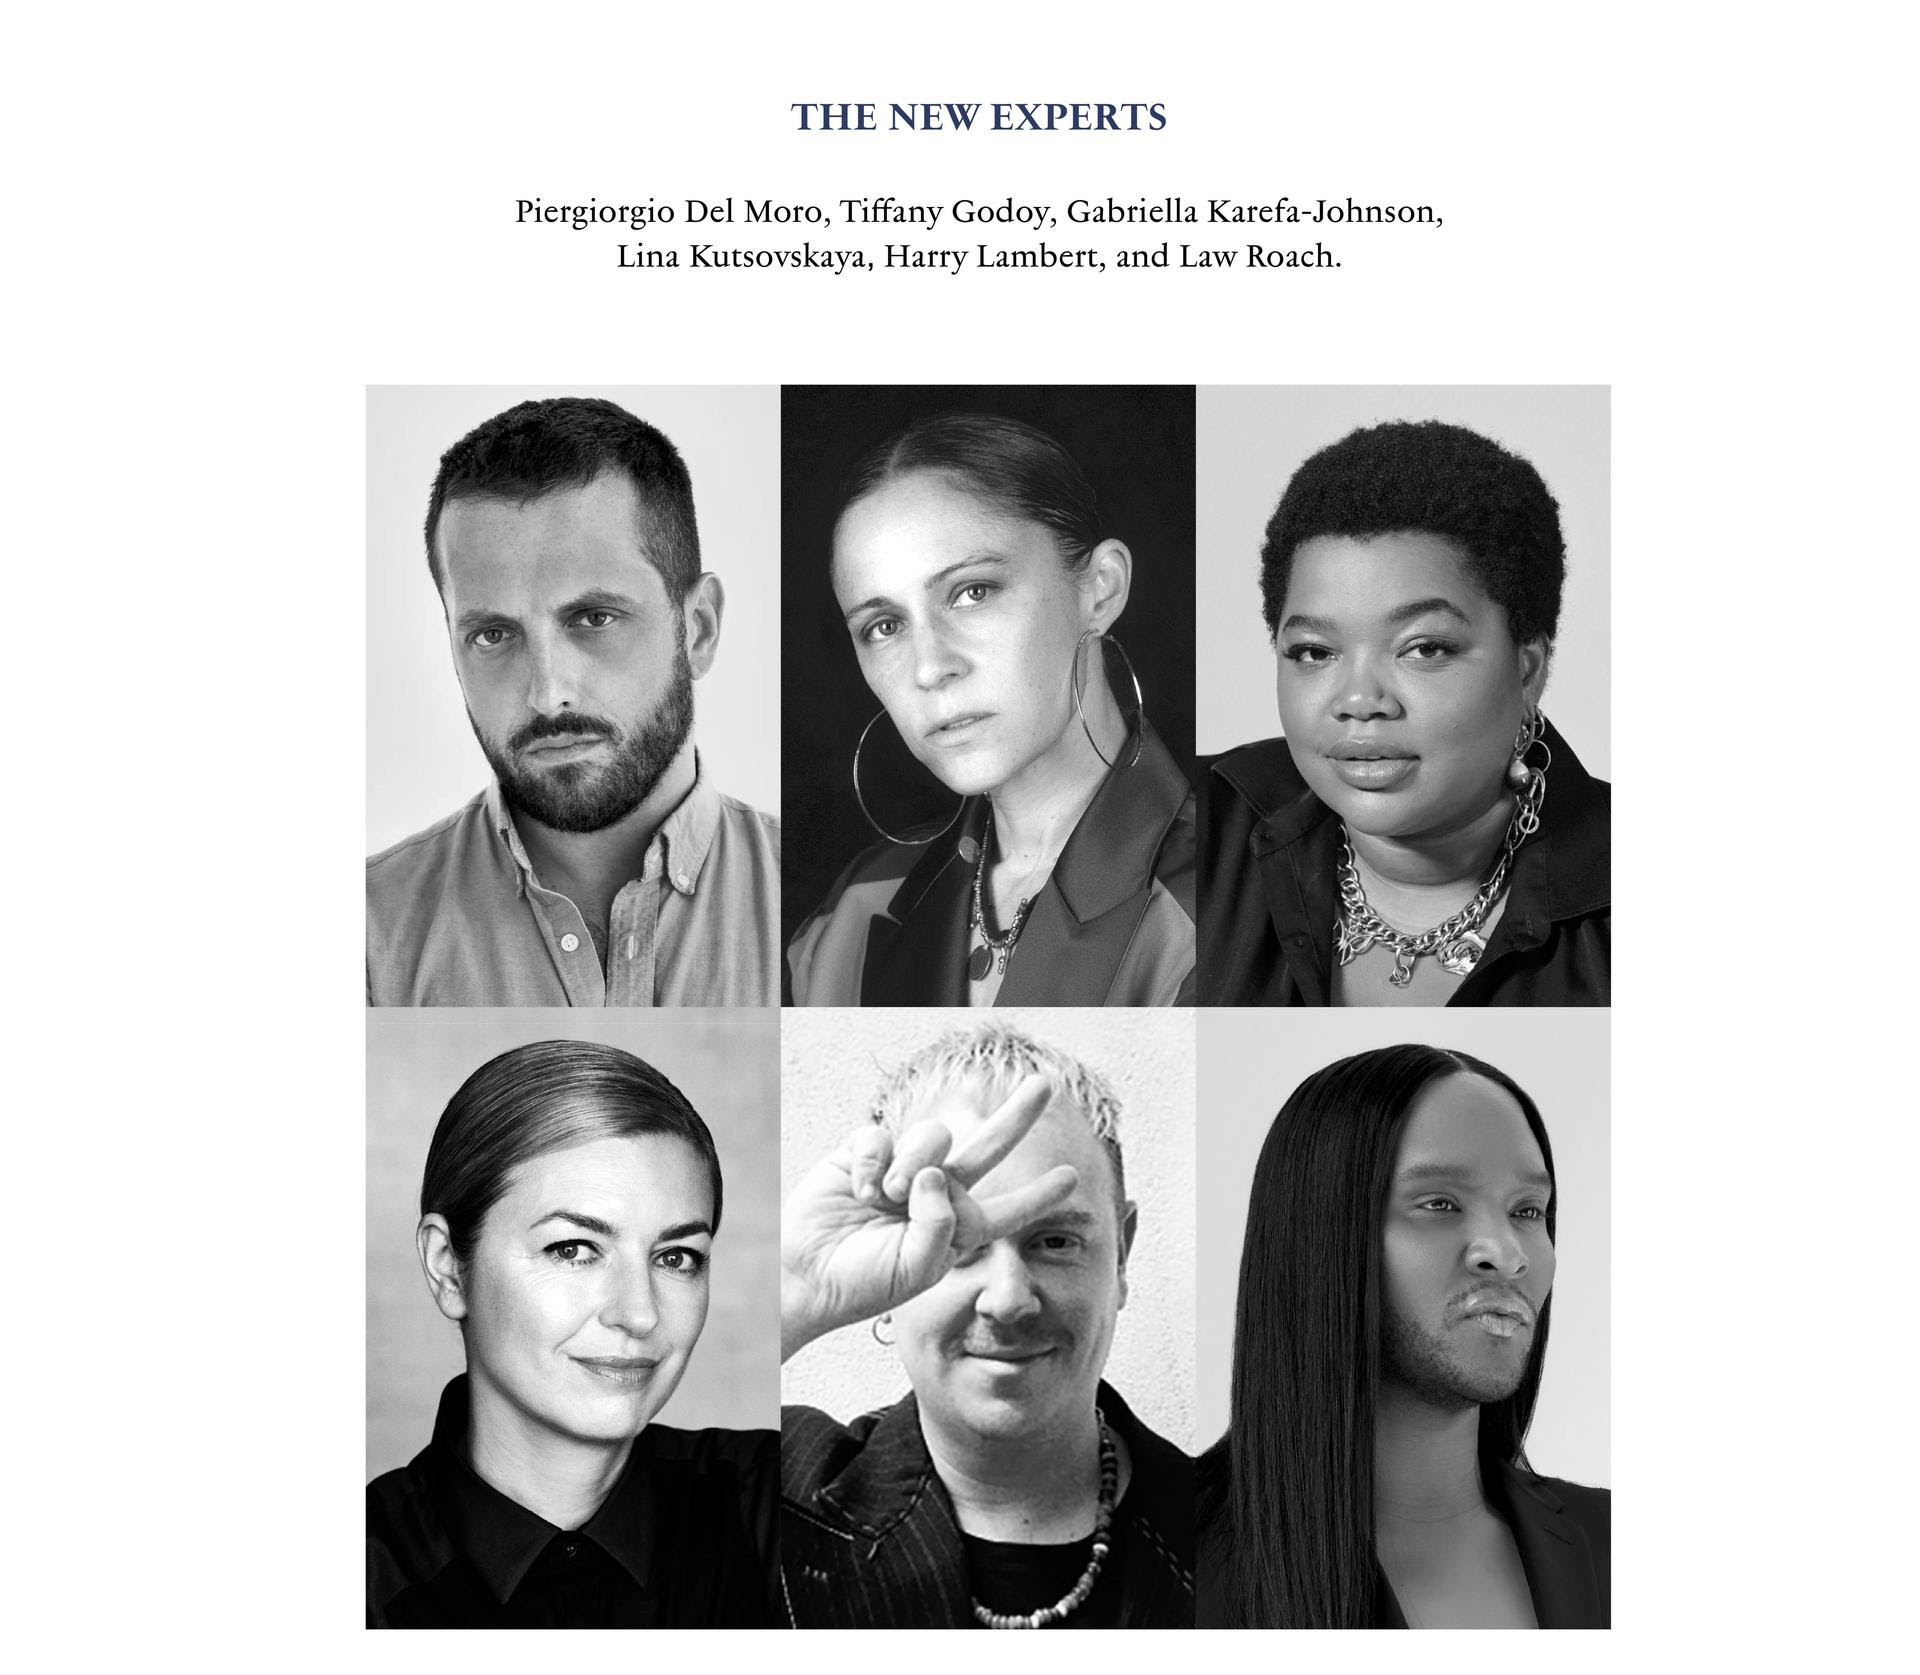 2023 LVMH Prize for young Fashion Designers (300,000 Euros Prize)